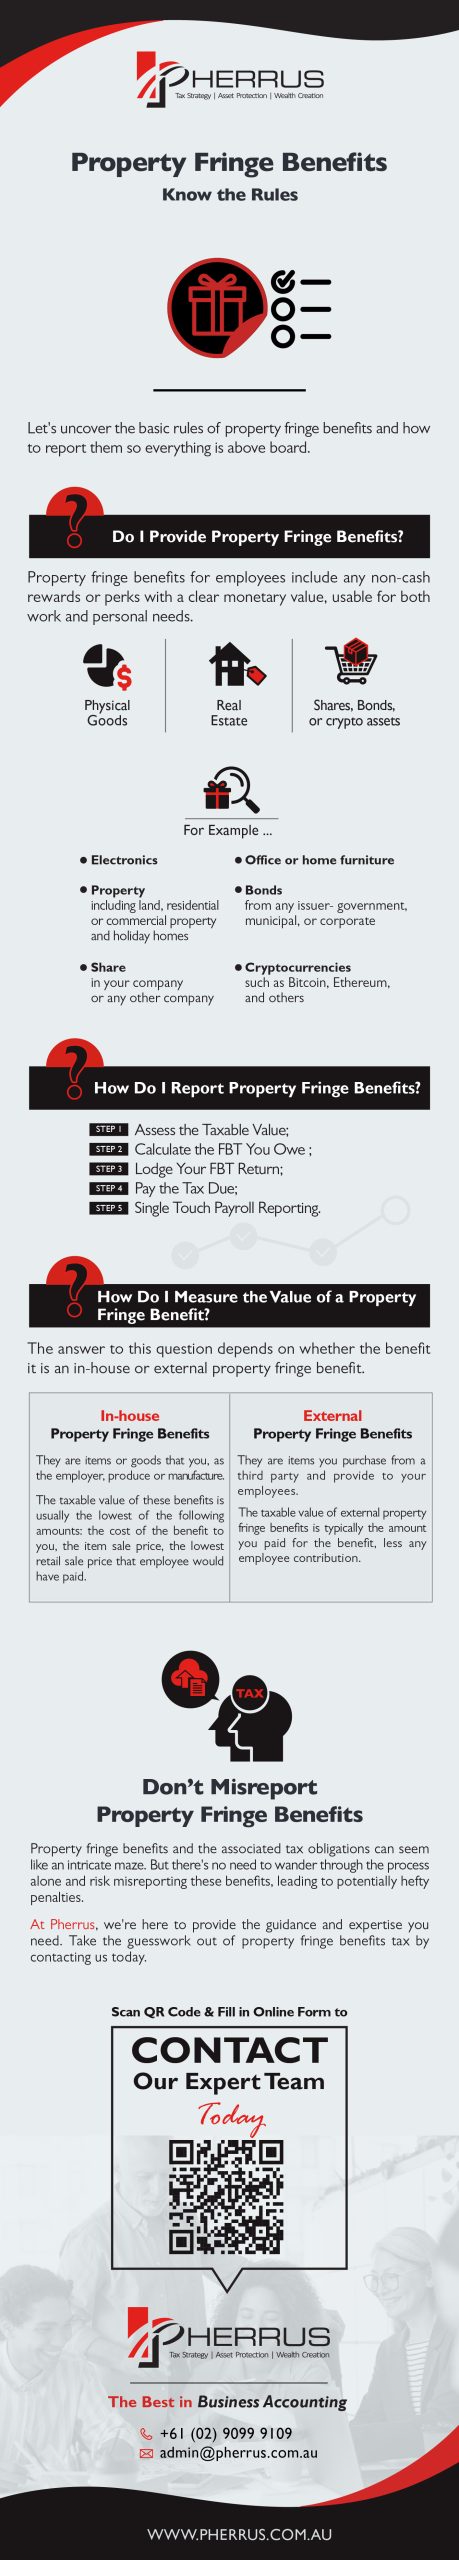 Property Fringe Benefits - Know the Rules Infographic